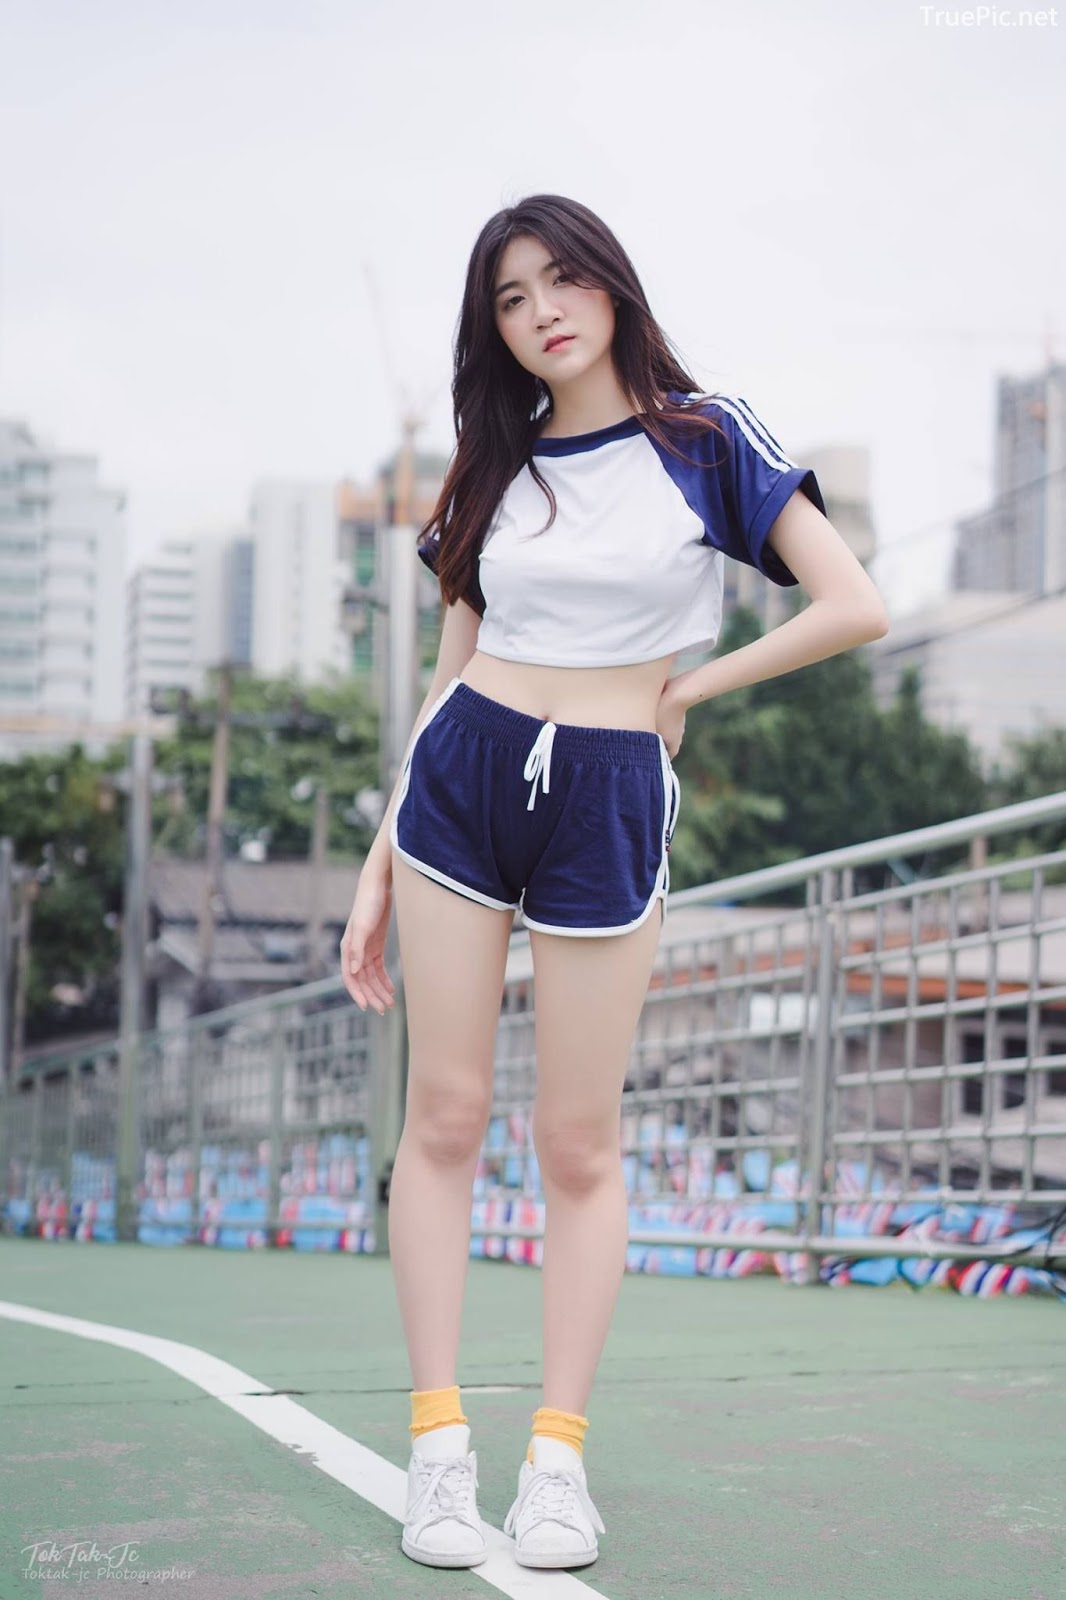 Hot Girl Thailand - Sasi Ngiunwan - Scenes From an Empty City - TruePic.net - Picture 44